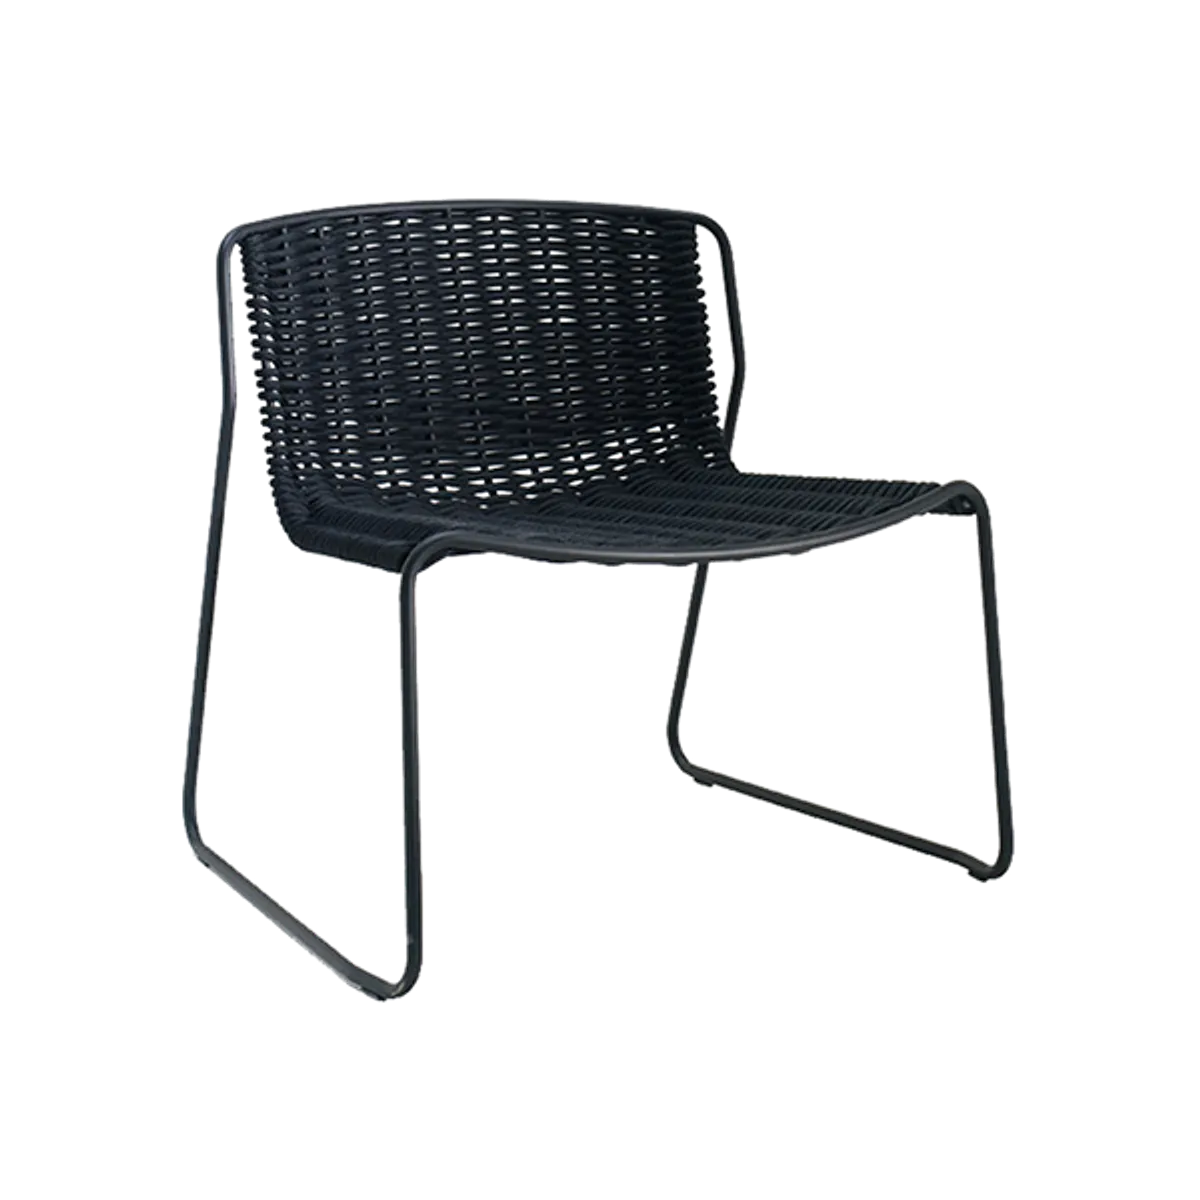 Web Rig Lounge Chair